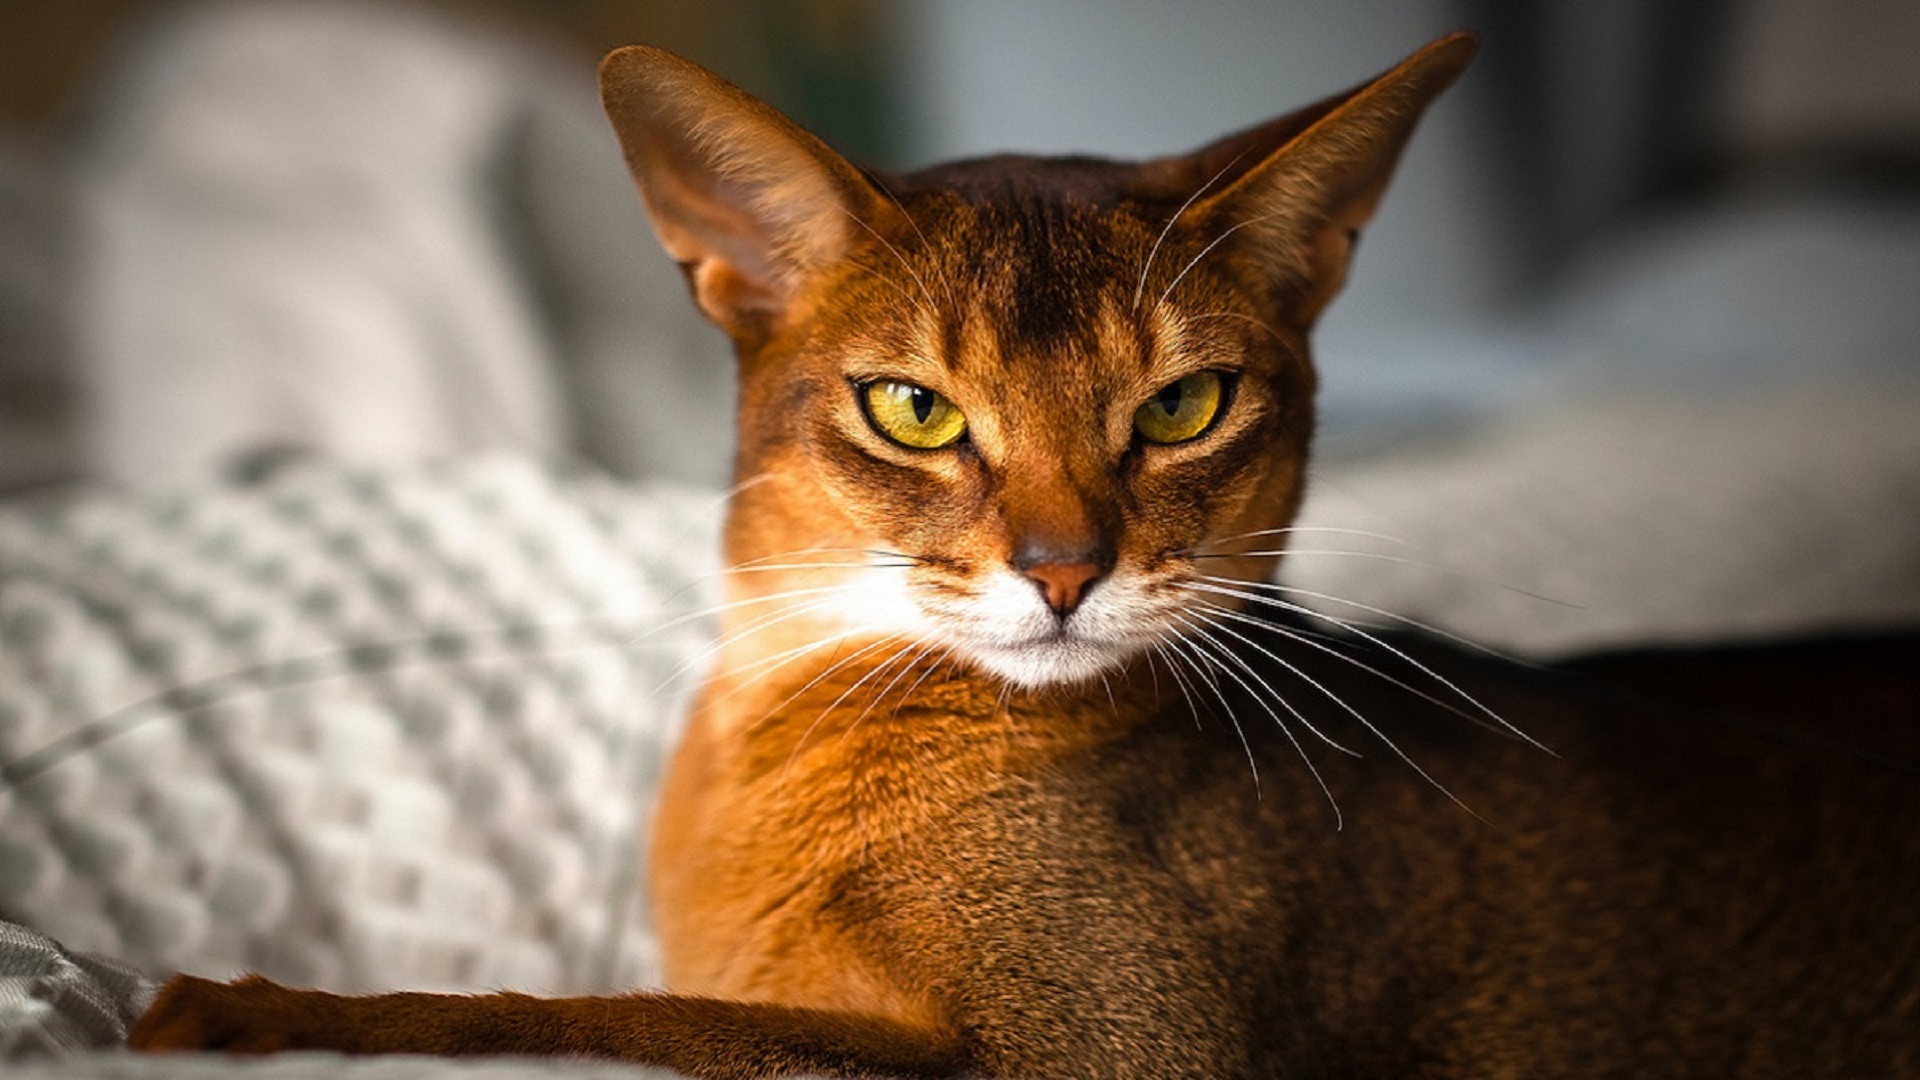 Can cat genes explain their nine lives?